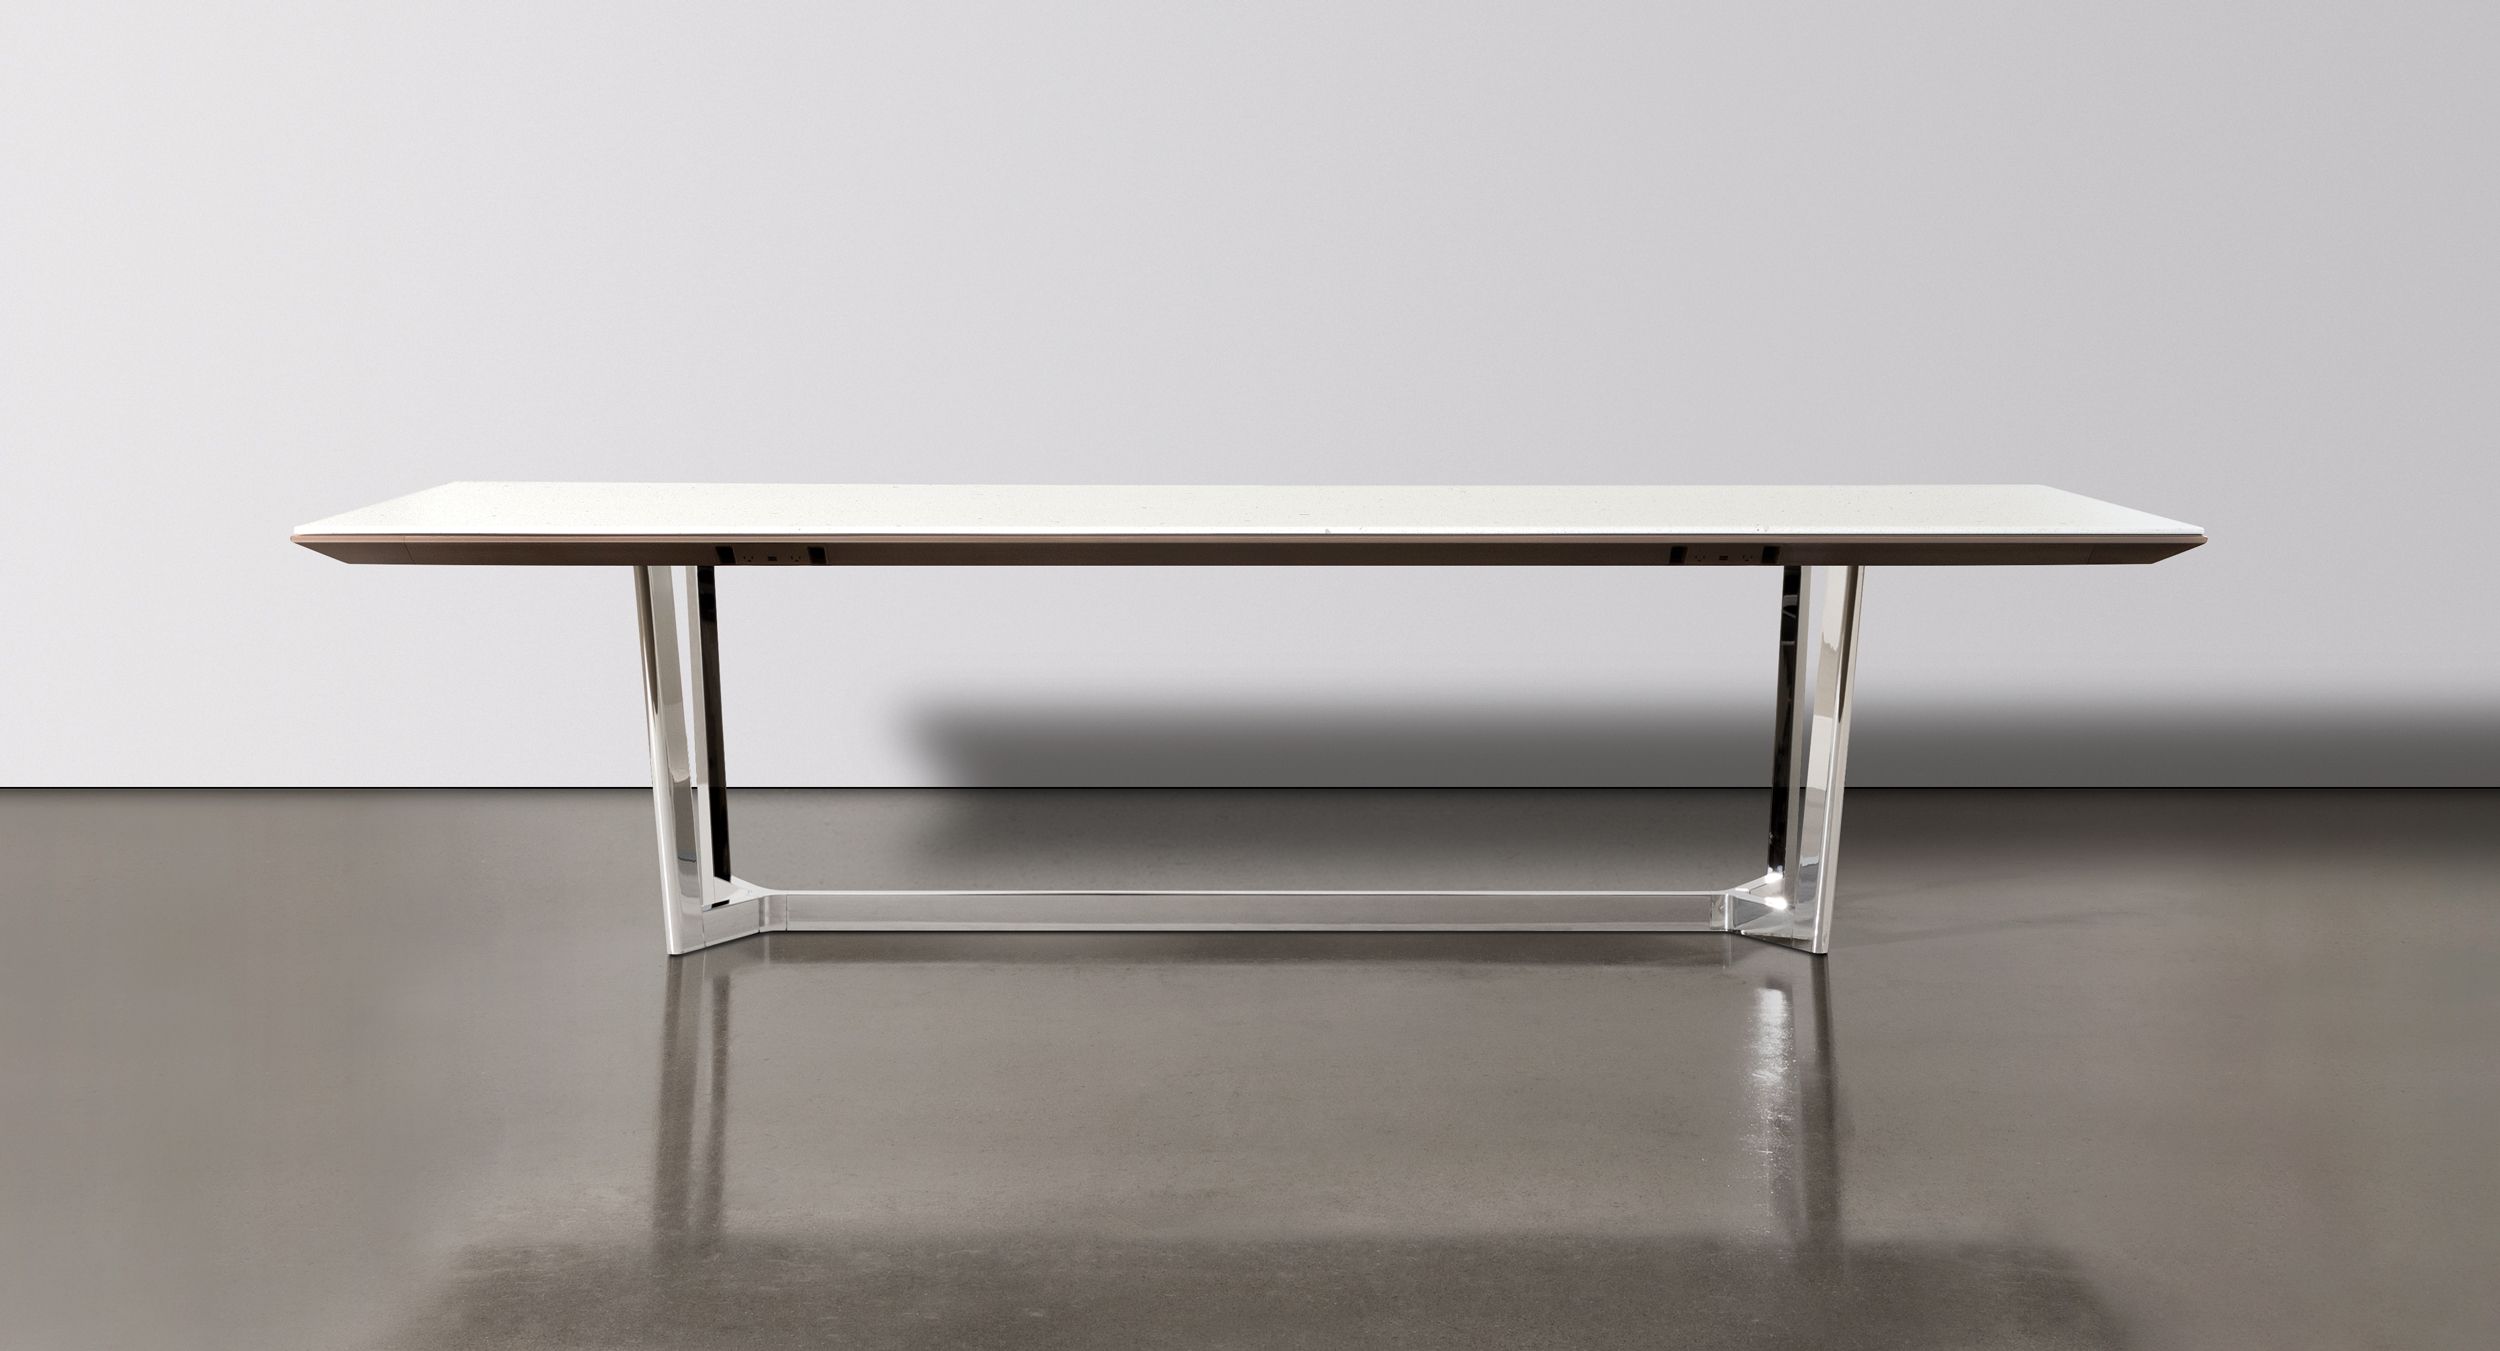 Halo table bases are offered in beautiful Polished Chrome or brushed anodized finishes and provide concealed wire pathways to invisibly integrate technology needs.